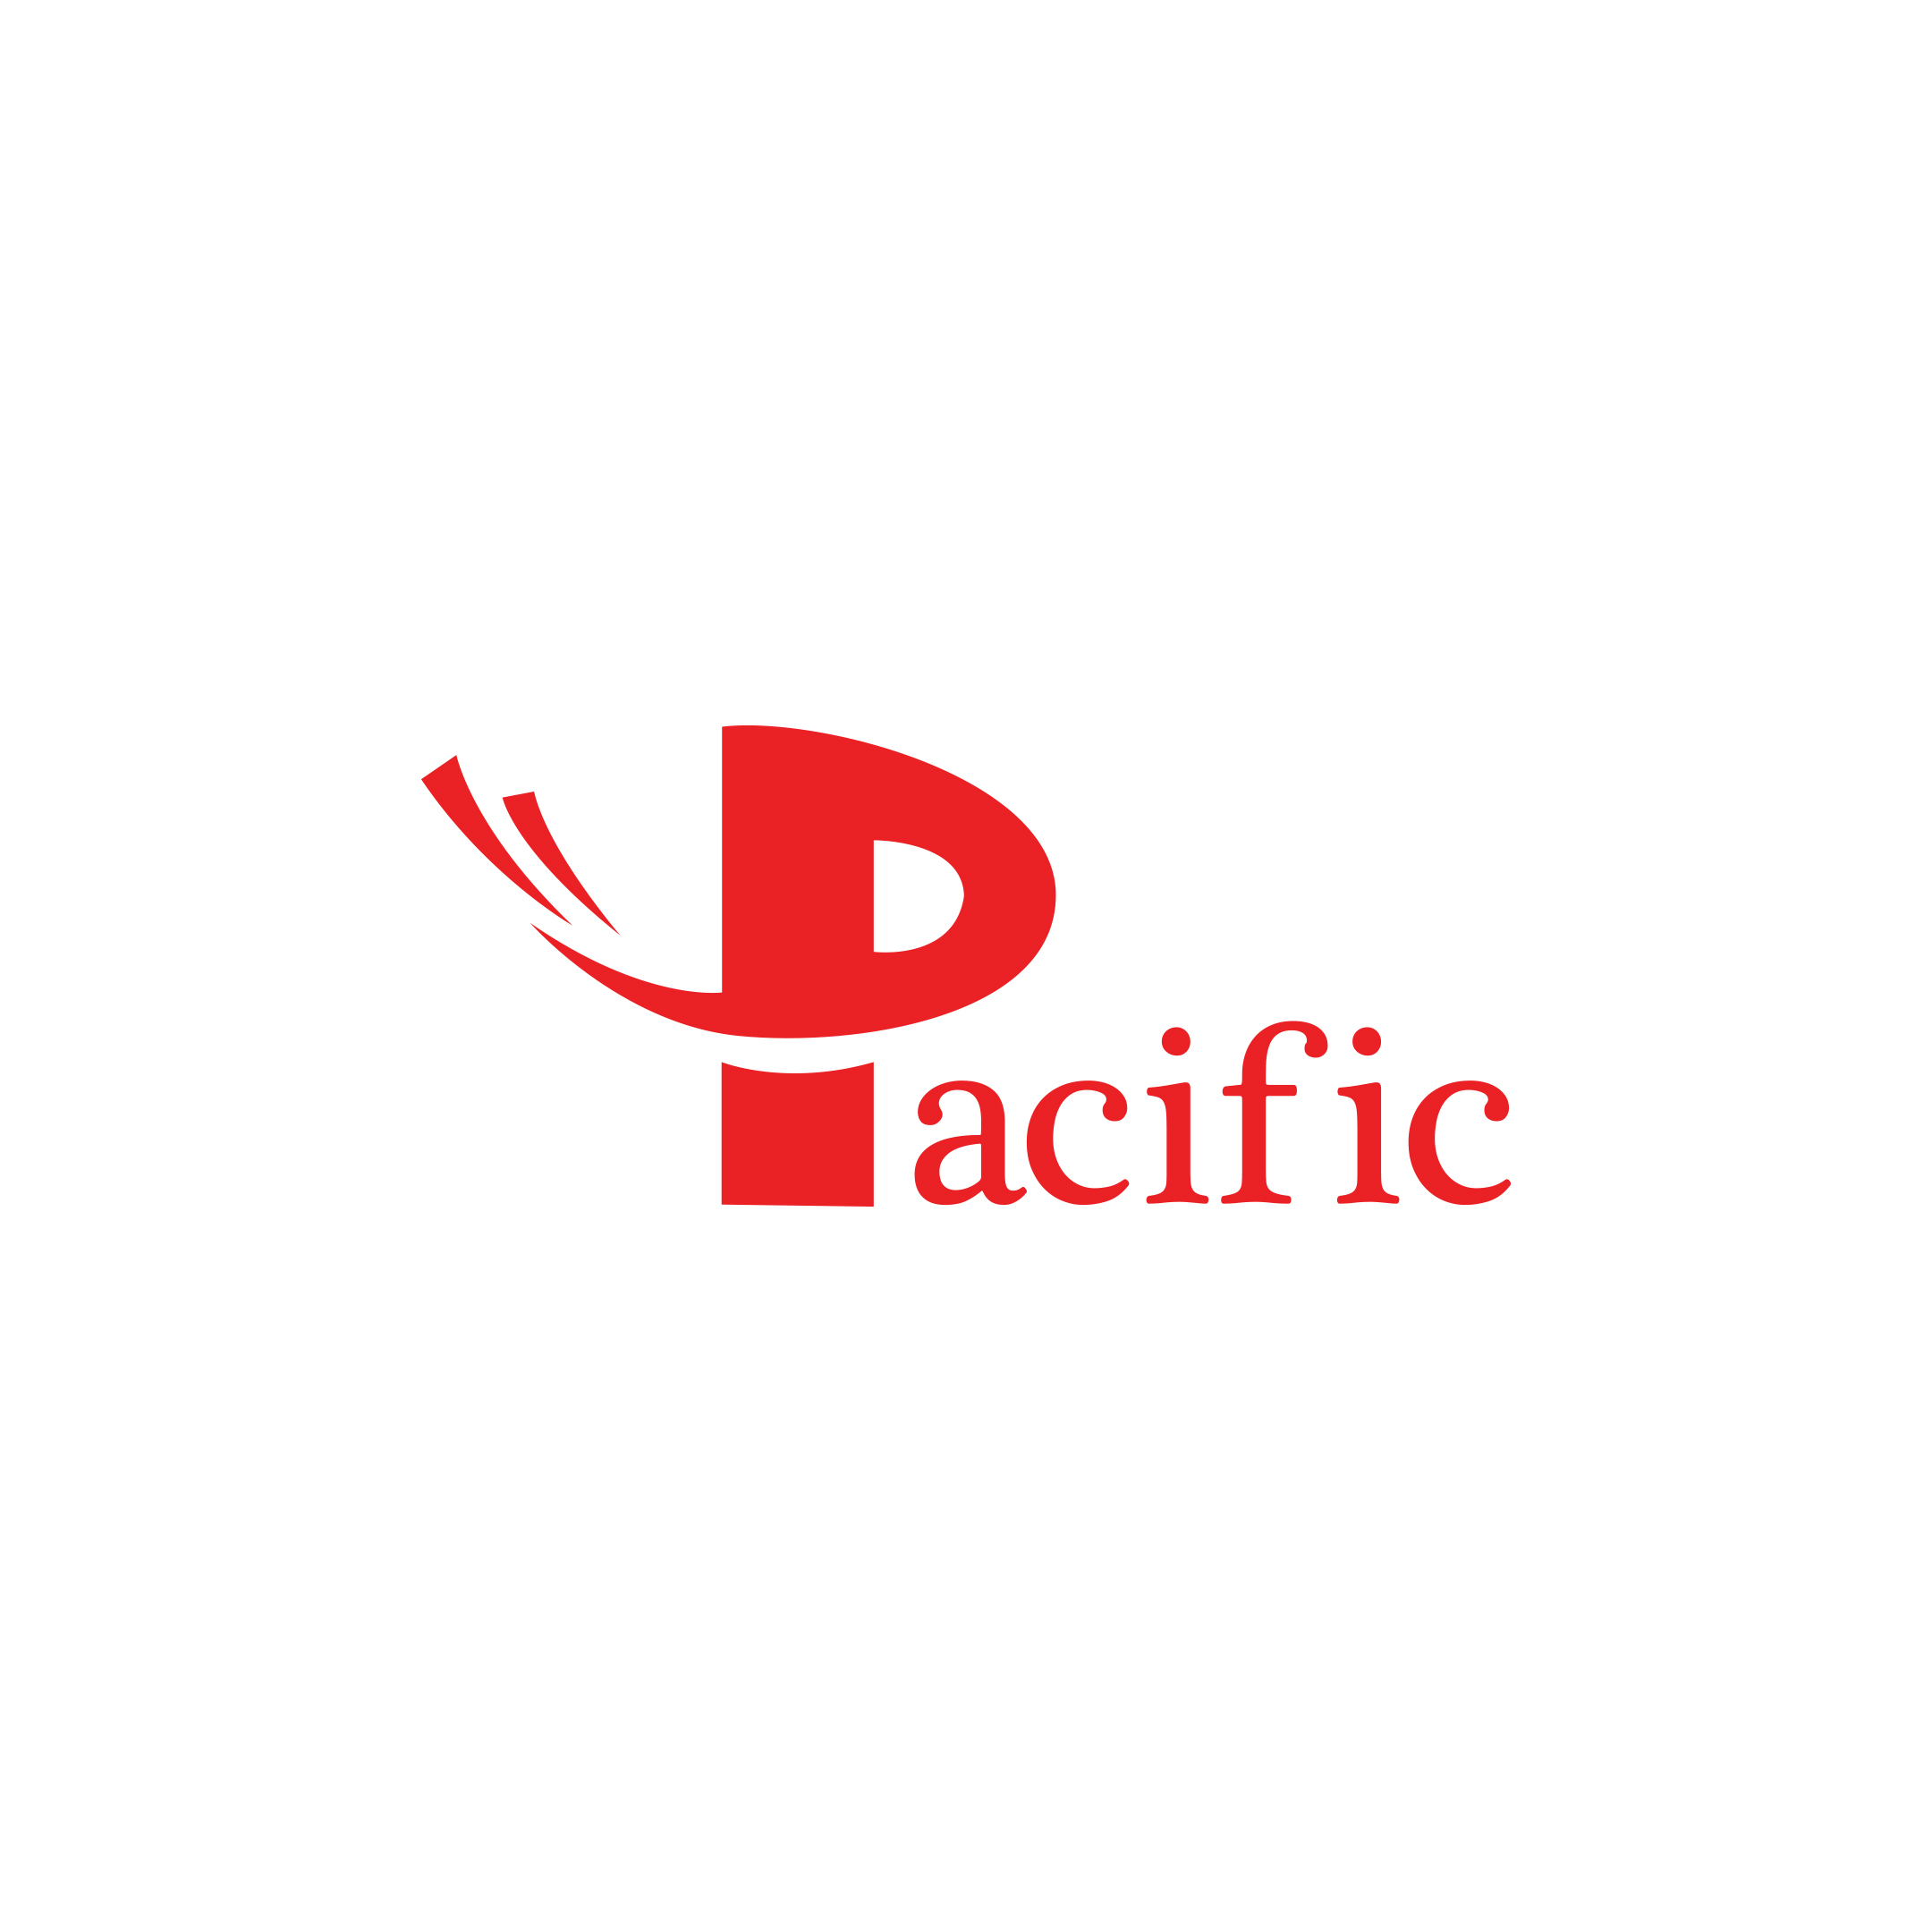 Pacific Trading And Contracting  WLL